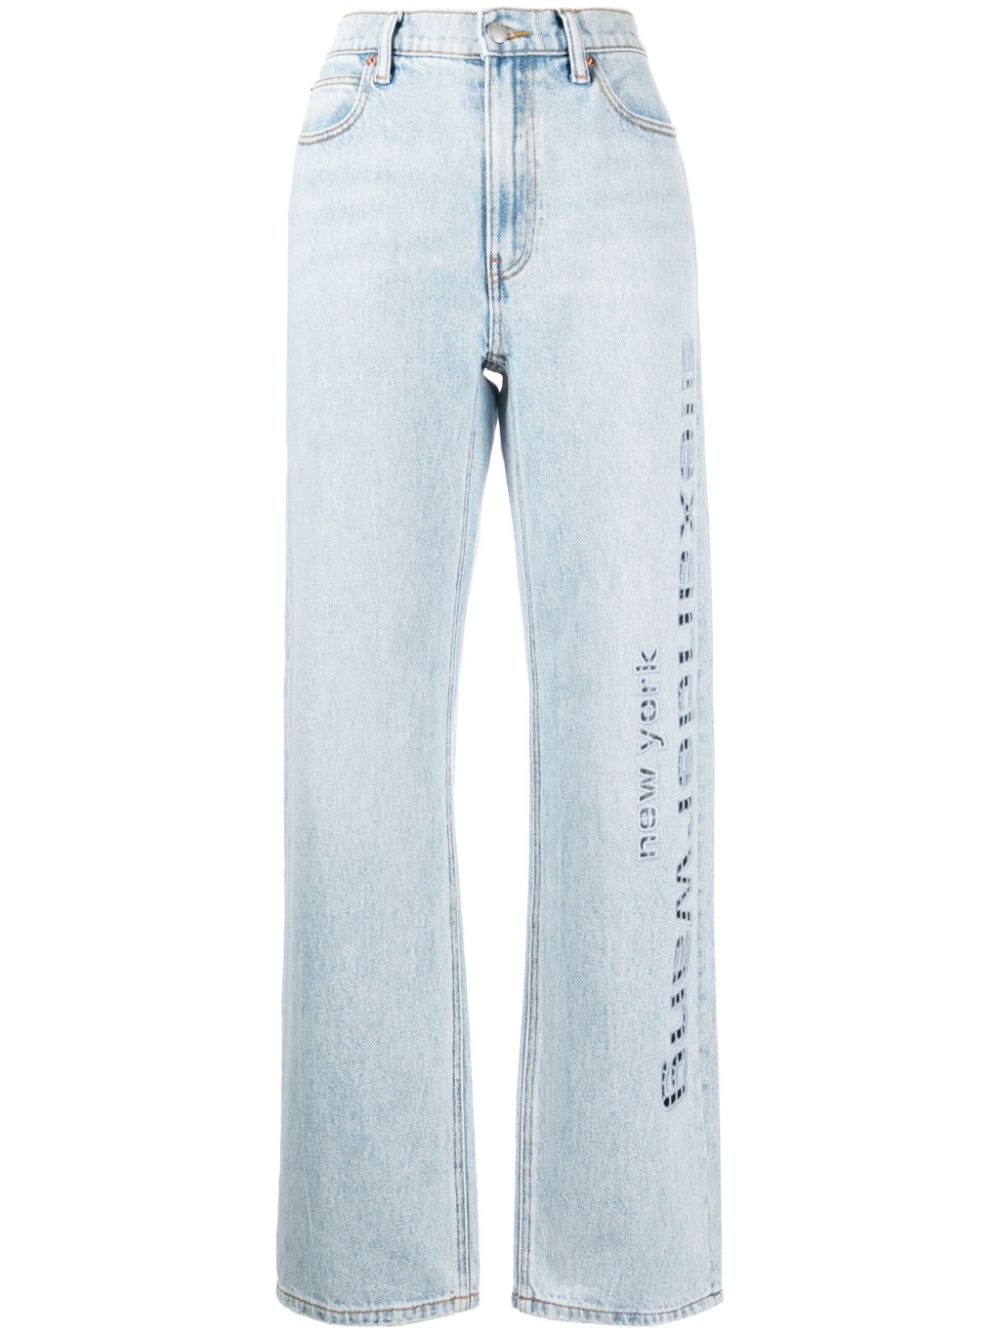 Alexander Wang logo-perforated Cotton Straight Jeans - Farfetch